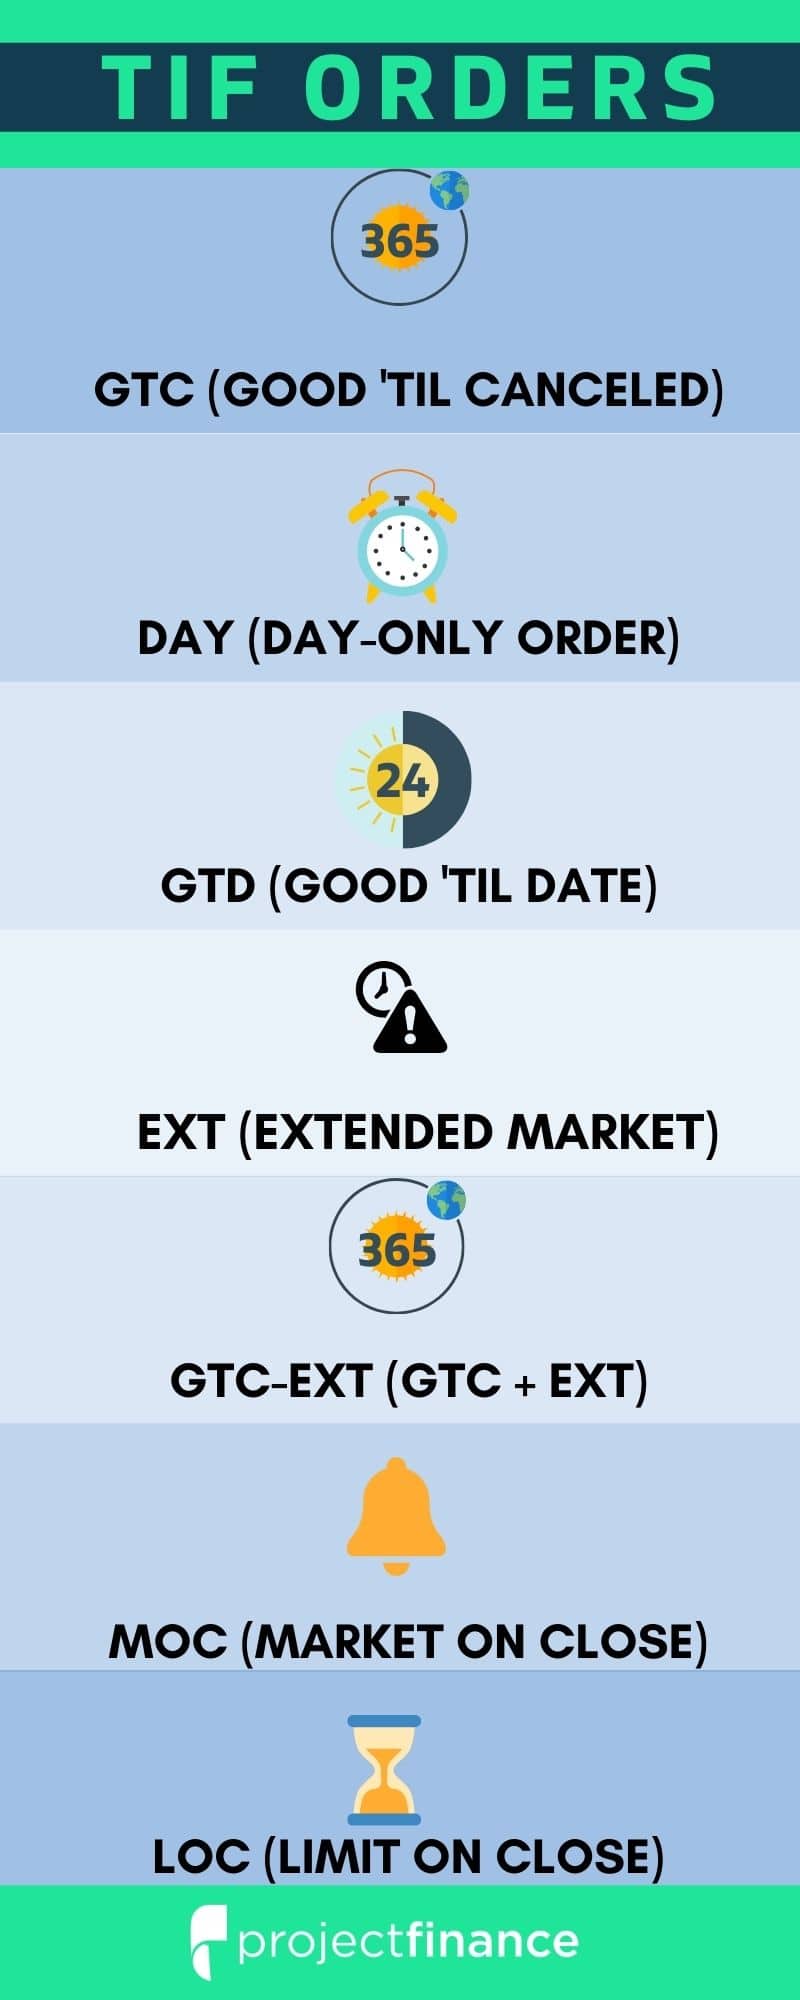 TIF Orders Types Explained DAY, GTC, GTD, EXT, GTCEXT, MOC, LOC